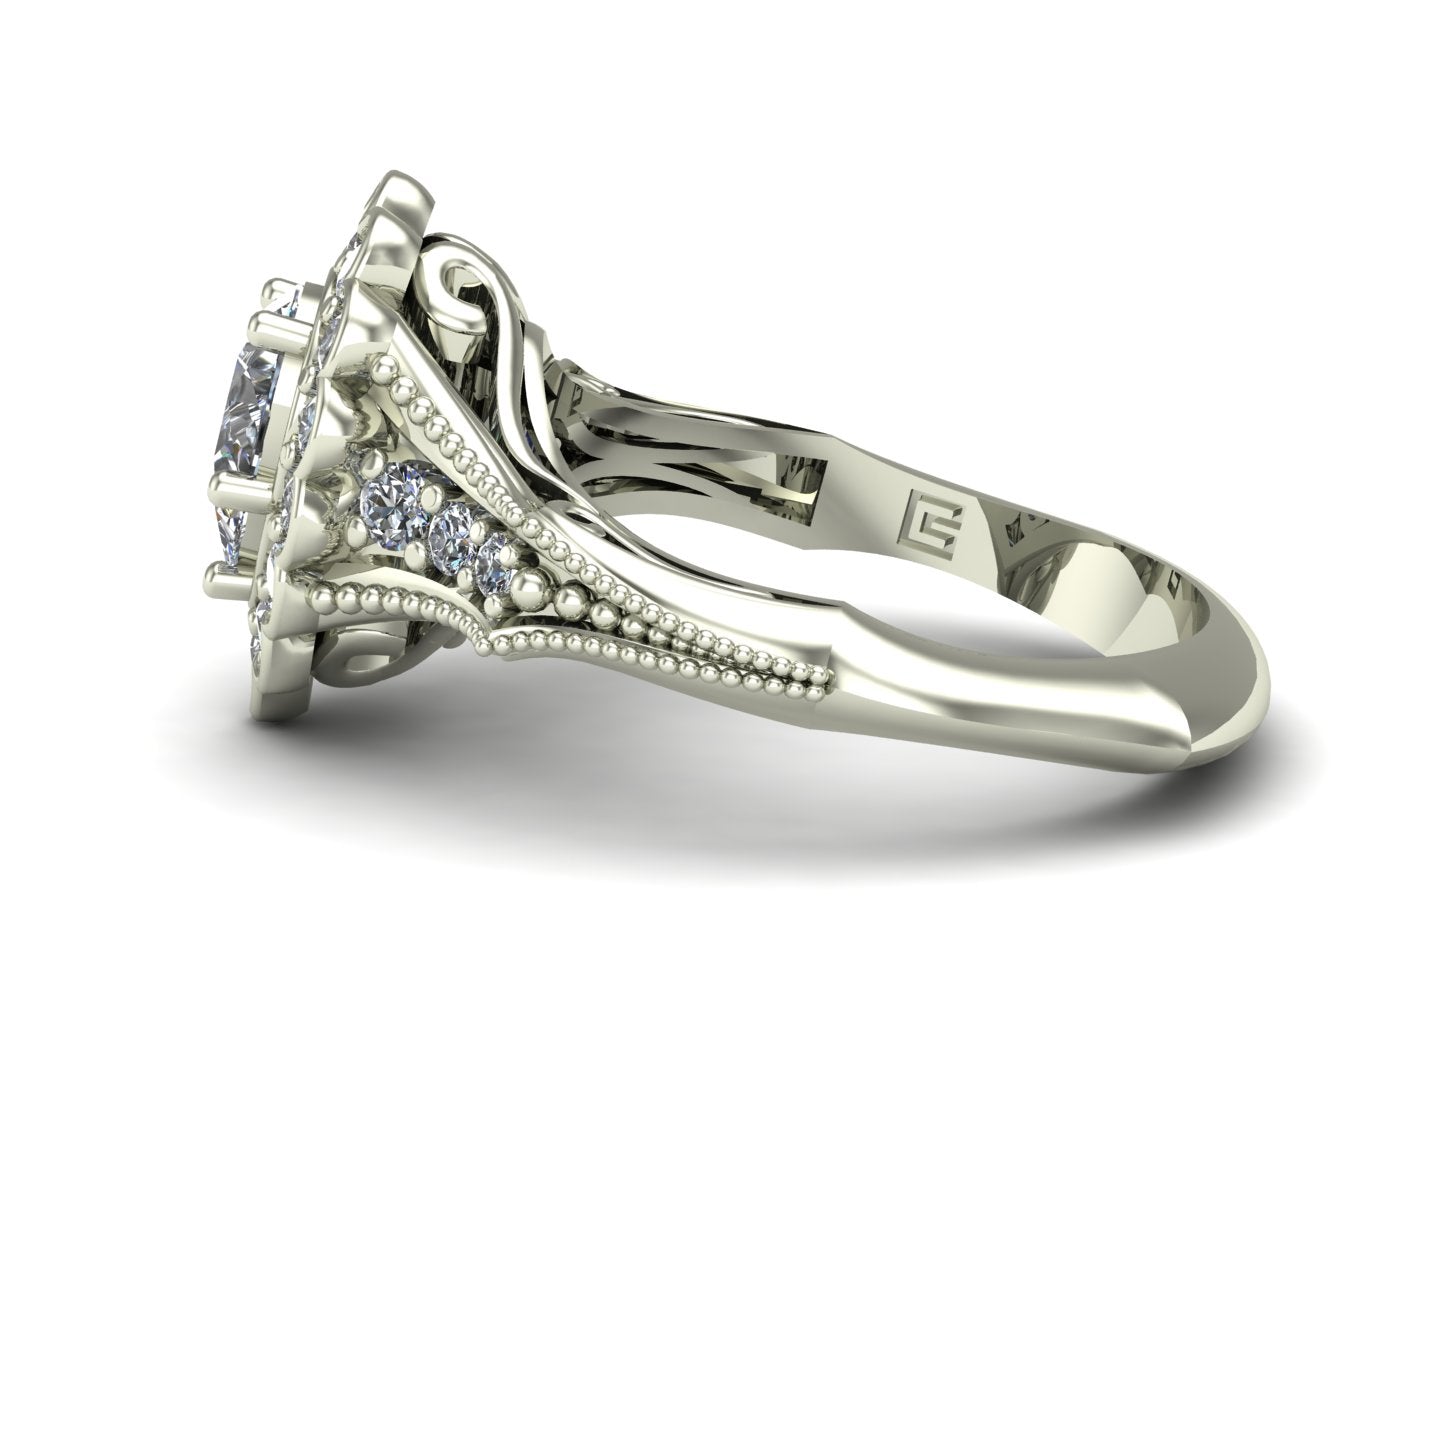 three quarter carat pear cut diamond engagement ring with scallop halo in 18k white gold - Charles Babb Designs - side view